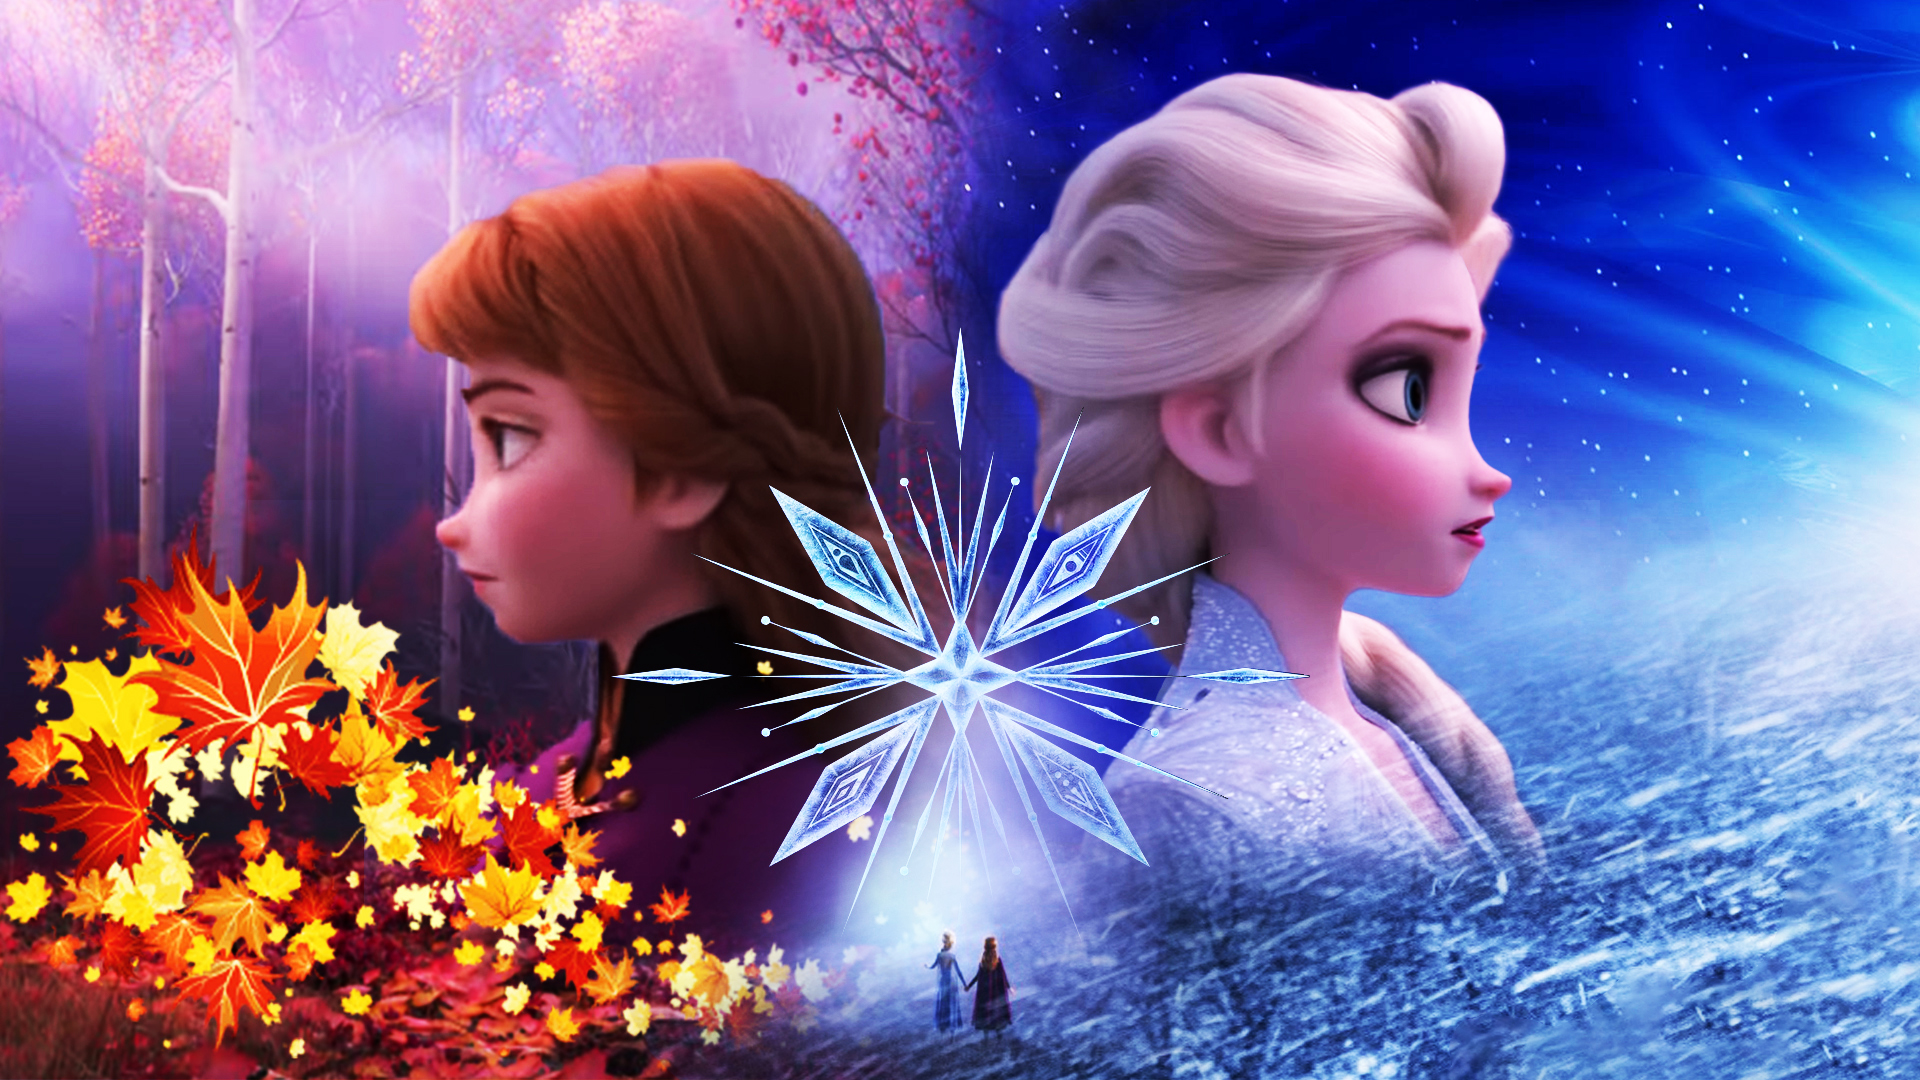 Frozen 3 Release Date, Trailer, Story Details and Rumors on the Disney Sequel